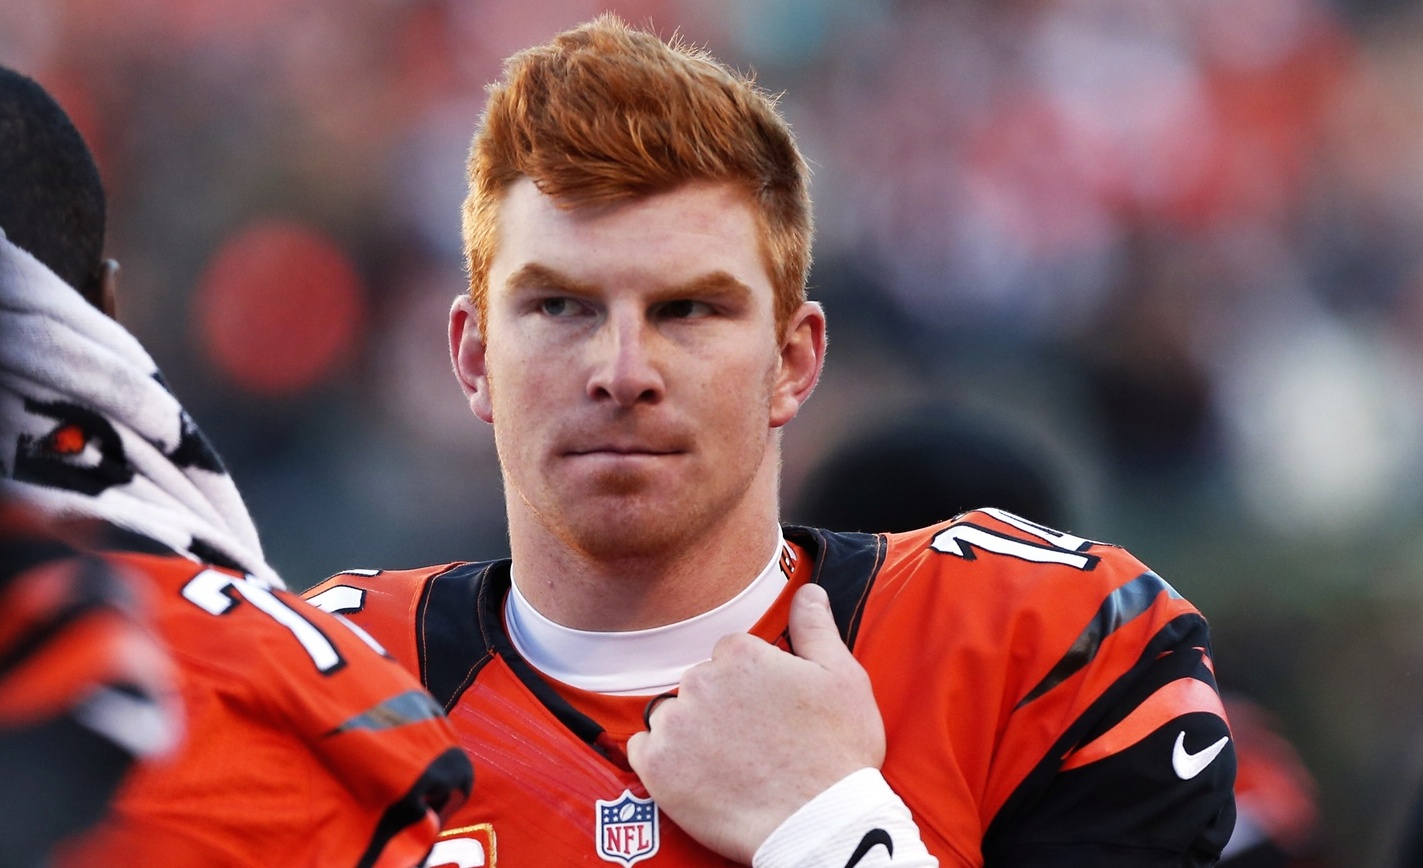 Andy Dalton grabs the collar of his jersey while standing on the sideline